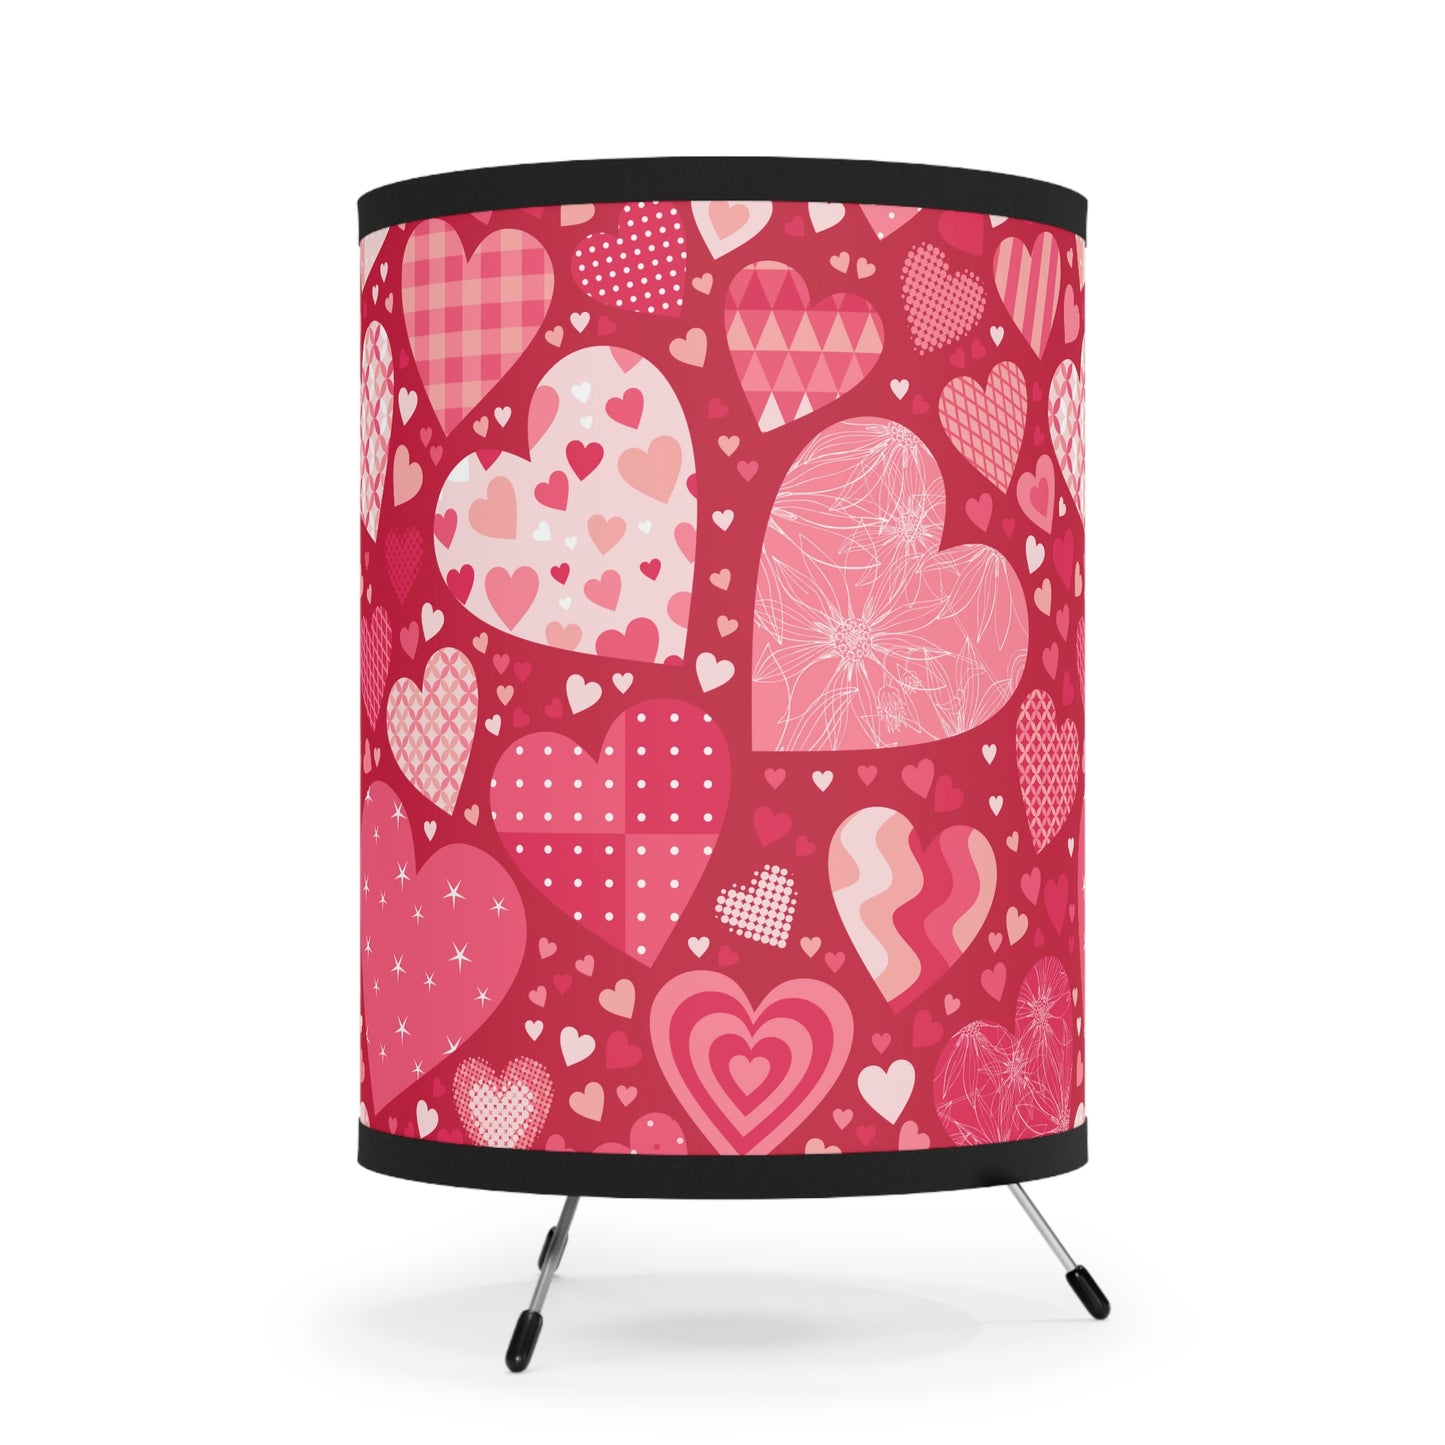 Blissful Hearts Tripod Lamp with High-Res Printed Shade, US\CA plug